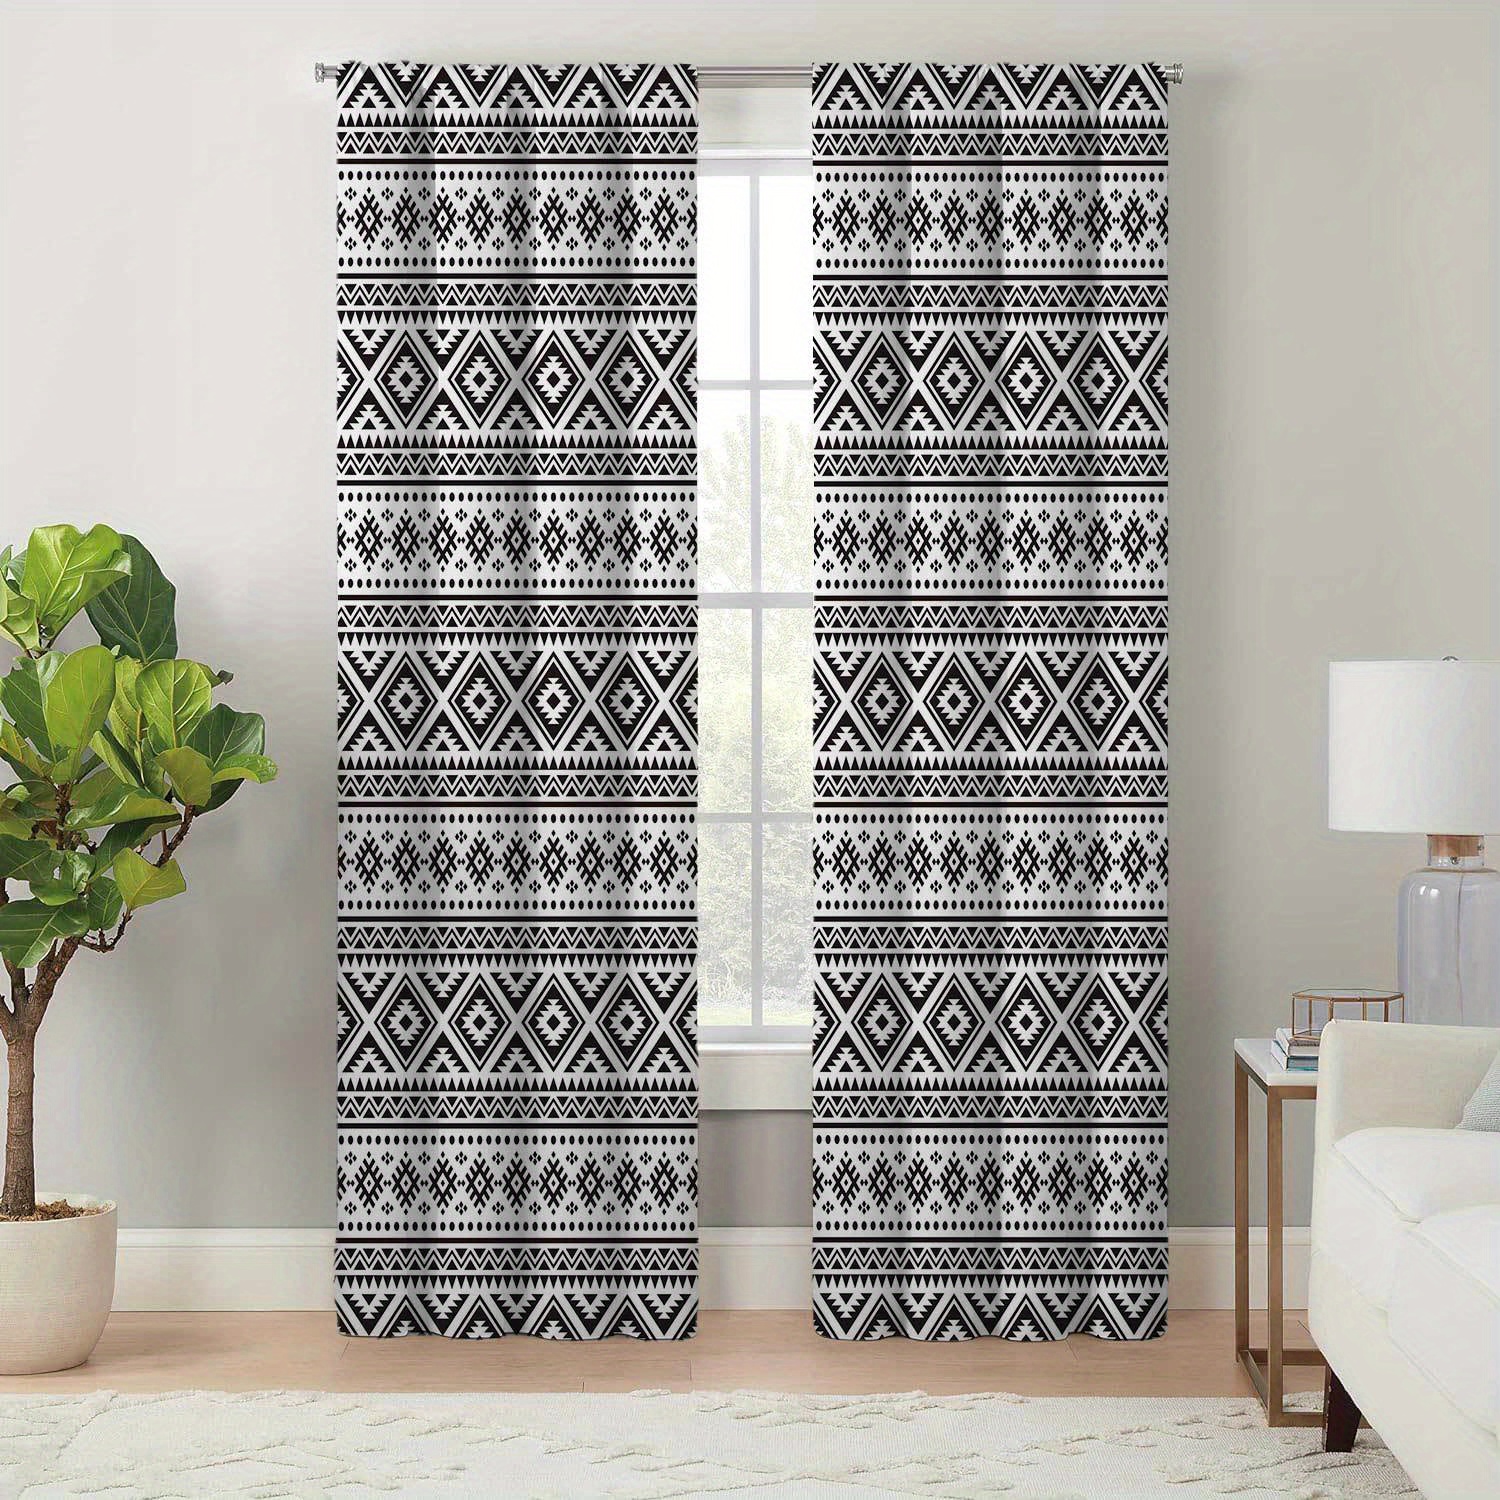 

2pcs/set, Modern Minimalist Style Living Room Decor Curtains, Geometric Black And White Grid Pattern Printed Curtains, Easy Care, 4 Seasons Charm, Durable And Easy To Hang For Home Decor